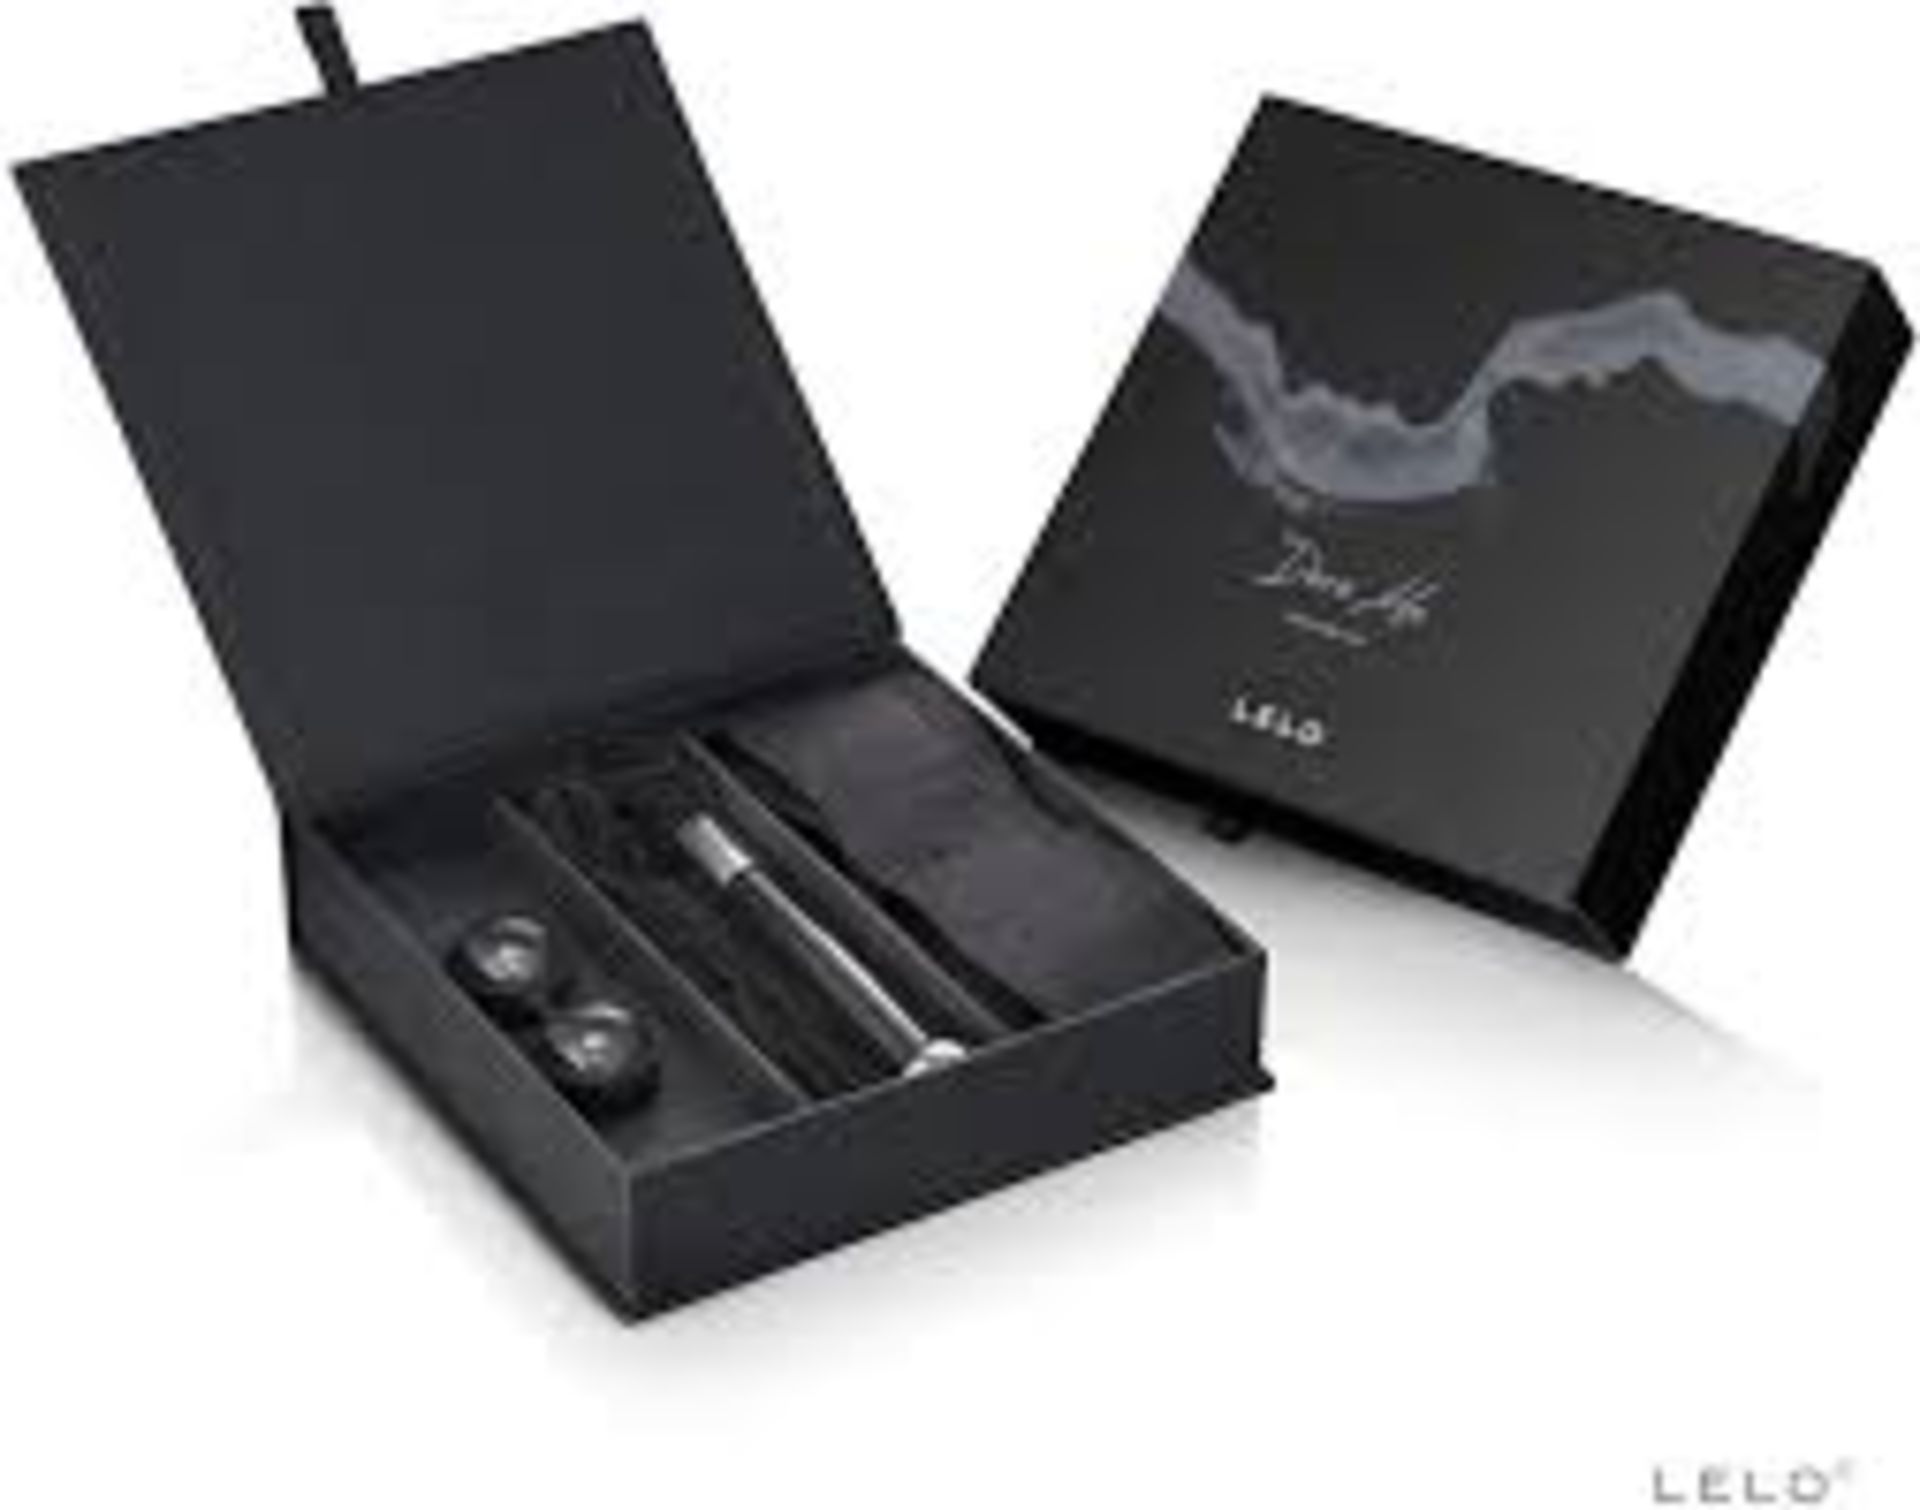 Boxed Dare Me Lelo Pleasure Sets RRP £169 (Appraisals Available Upon Request) (Pictures are for